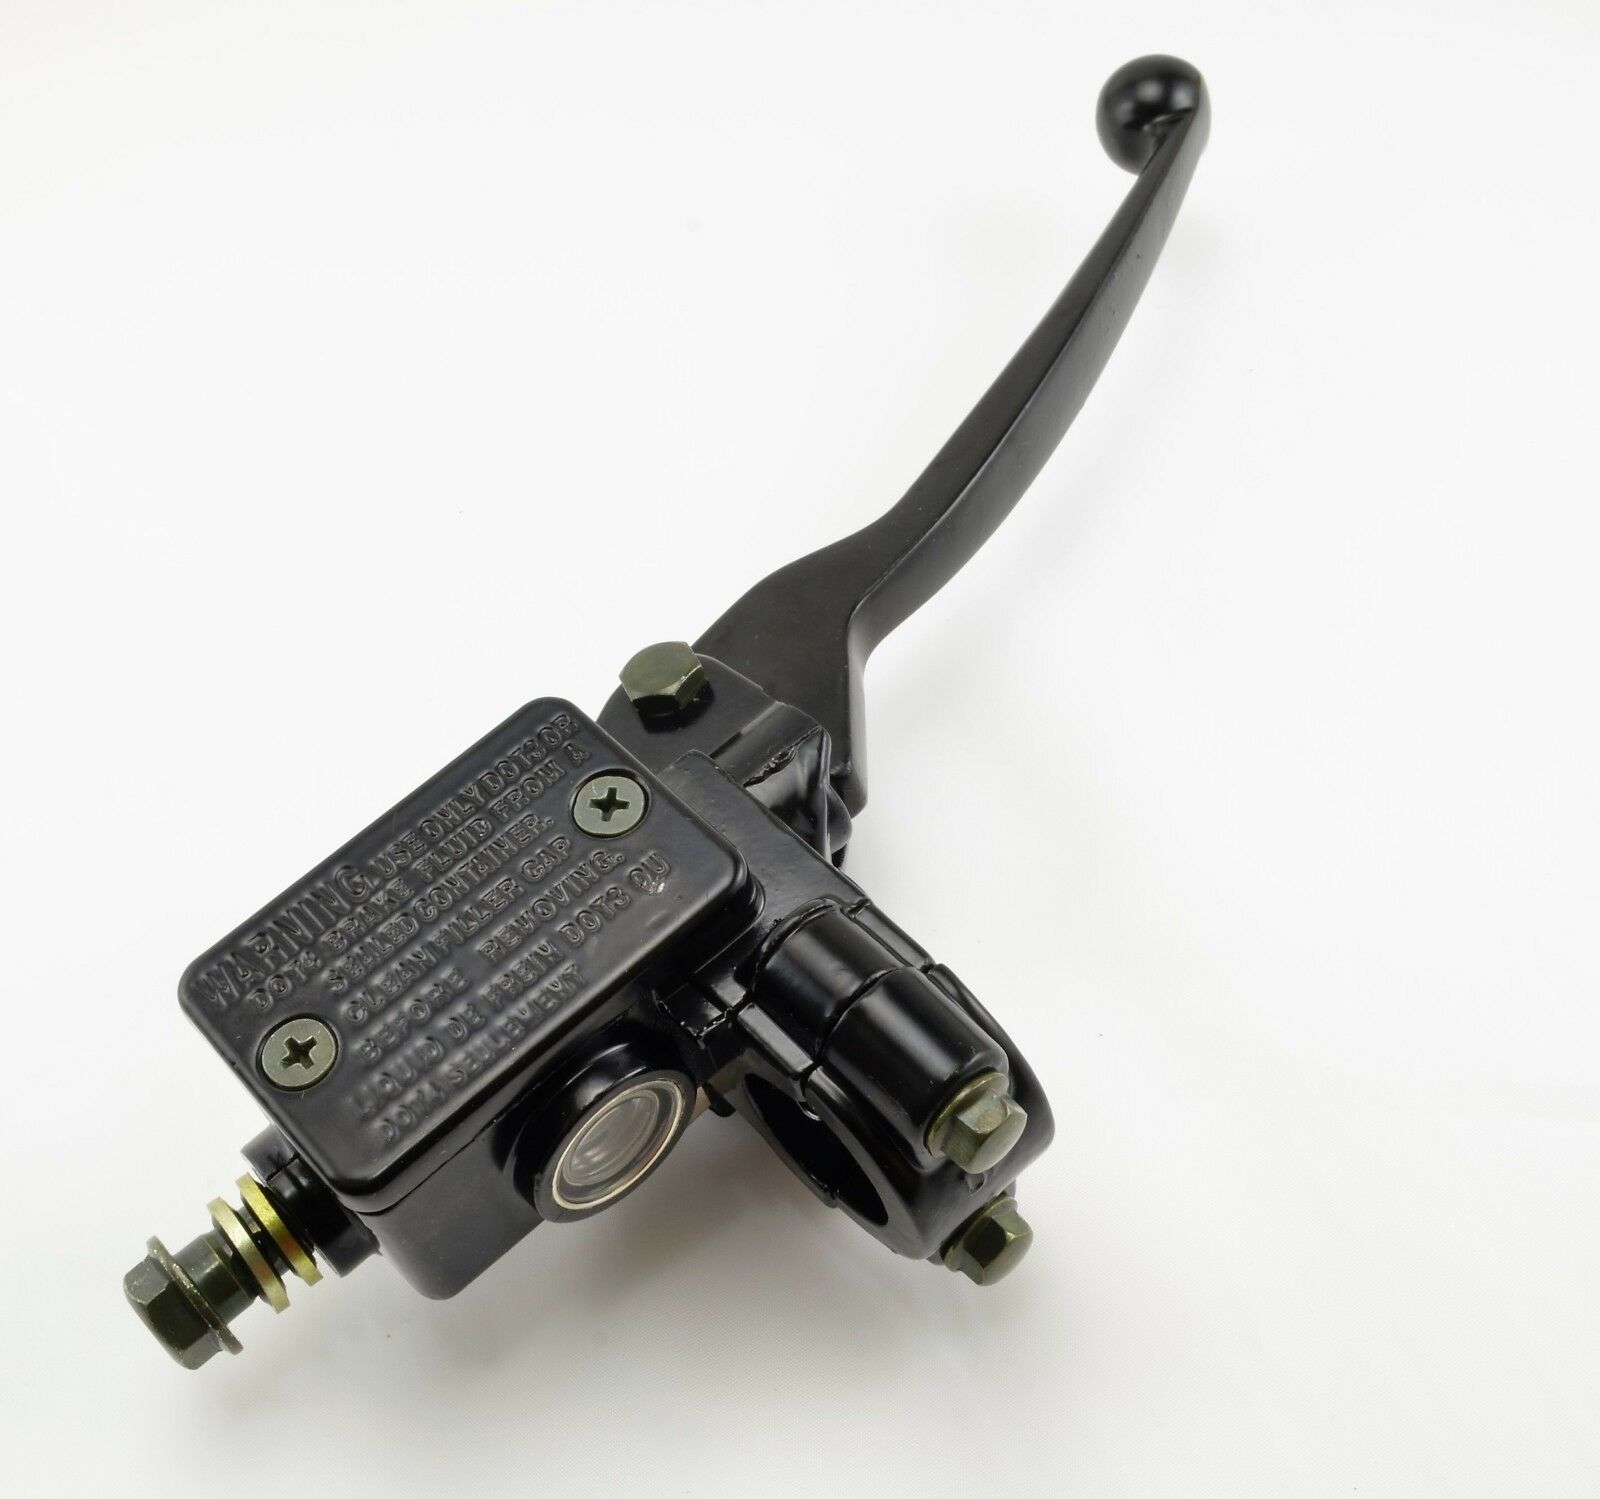 New Brake Master Cylinder For Gy6 50cc 125cc 150cc 250cc Scooter Moped